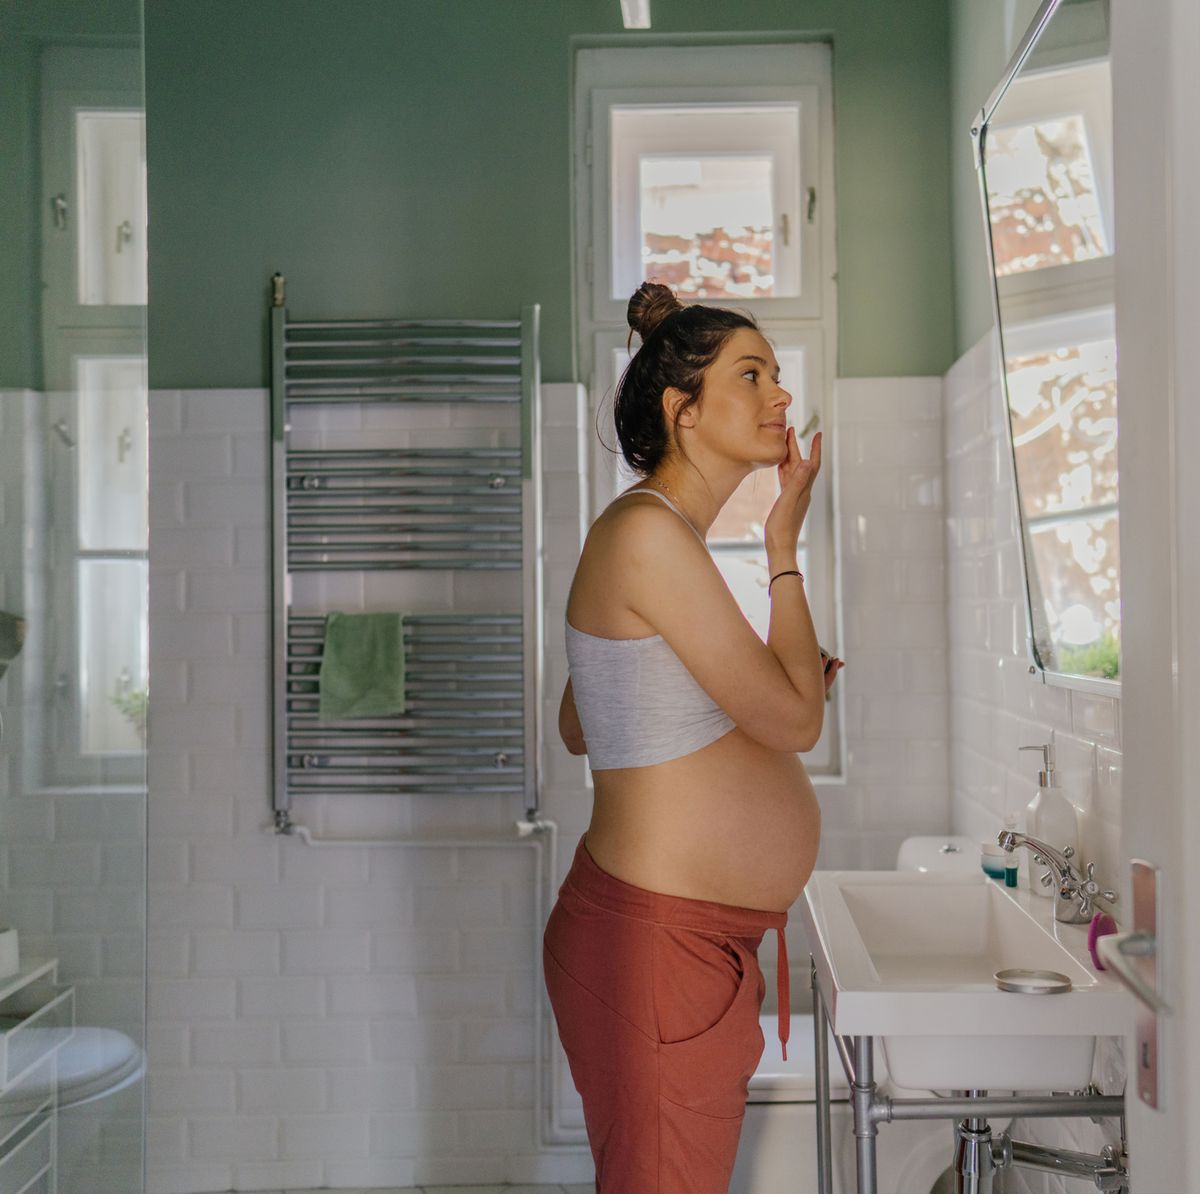 Pregnancy-safe skincare | Ingredients to avoid